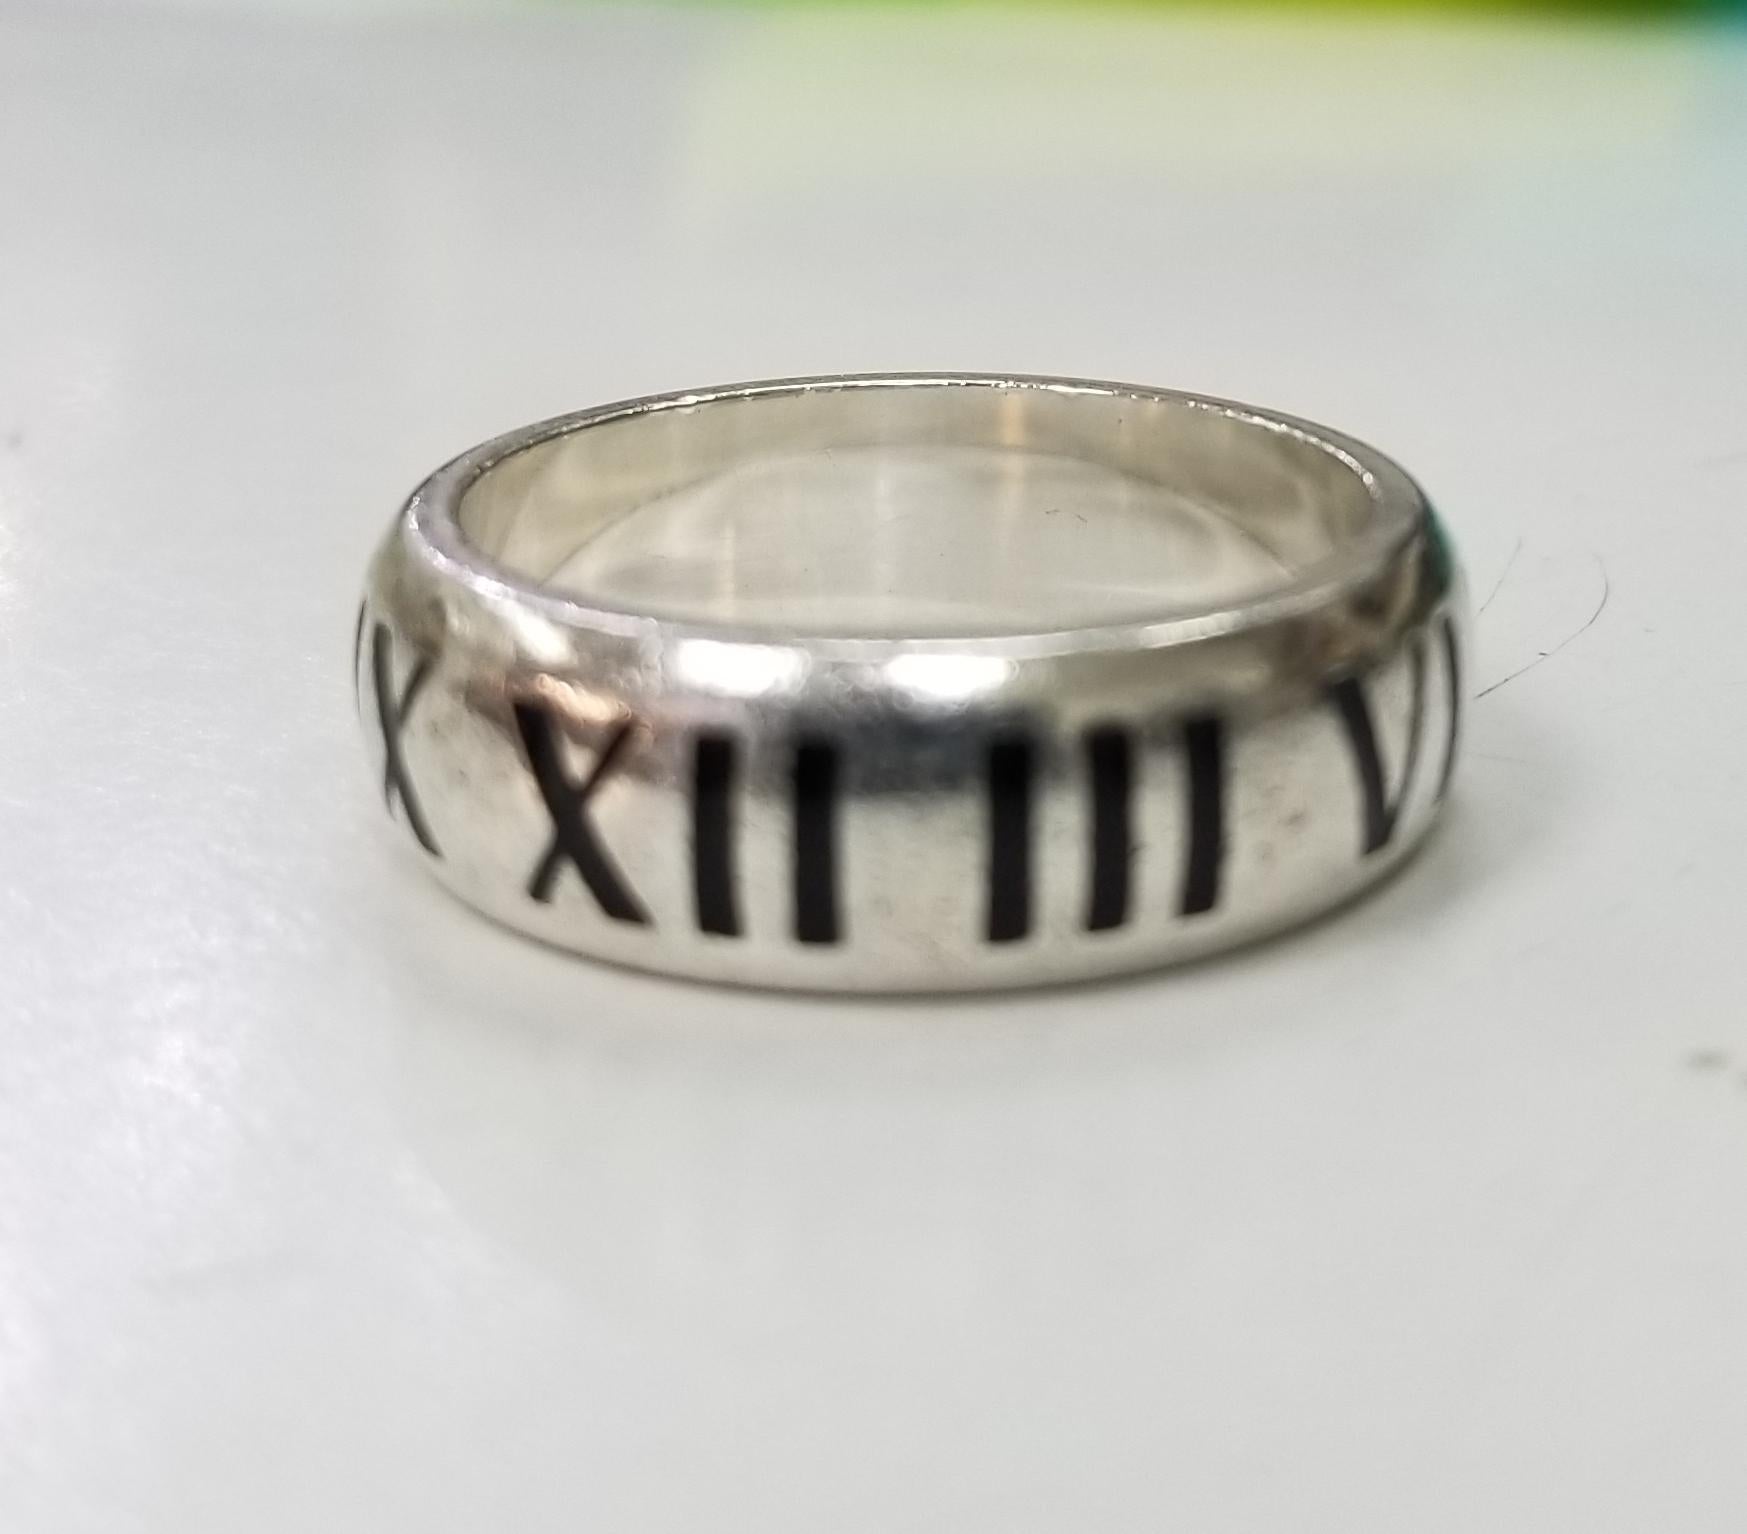 Authentic Tiffany & Co. ring
Hallmark: Pictured.
100% authentic!
Comes with the Tiffany pouch!
TIFFANY & Co.  ATLAS STERLING SILVER WEDDING BAND RING SIZE 12.5
    Ring size is a 12.5
    Ring measures 8 mm wide
    Sterling silver, Enamel Roman